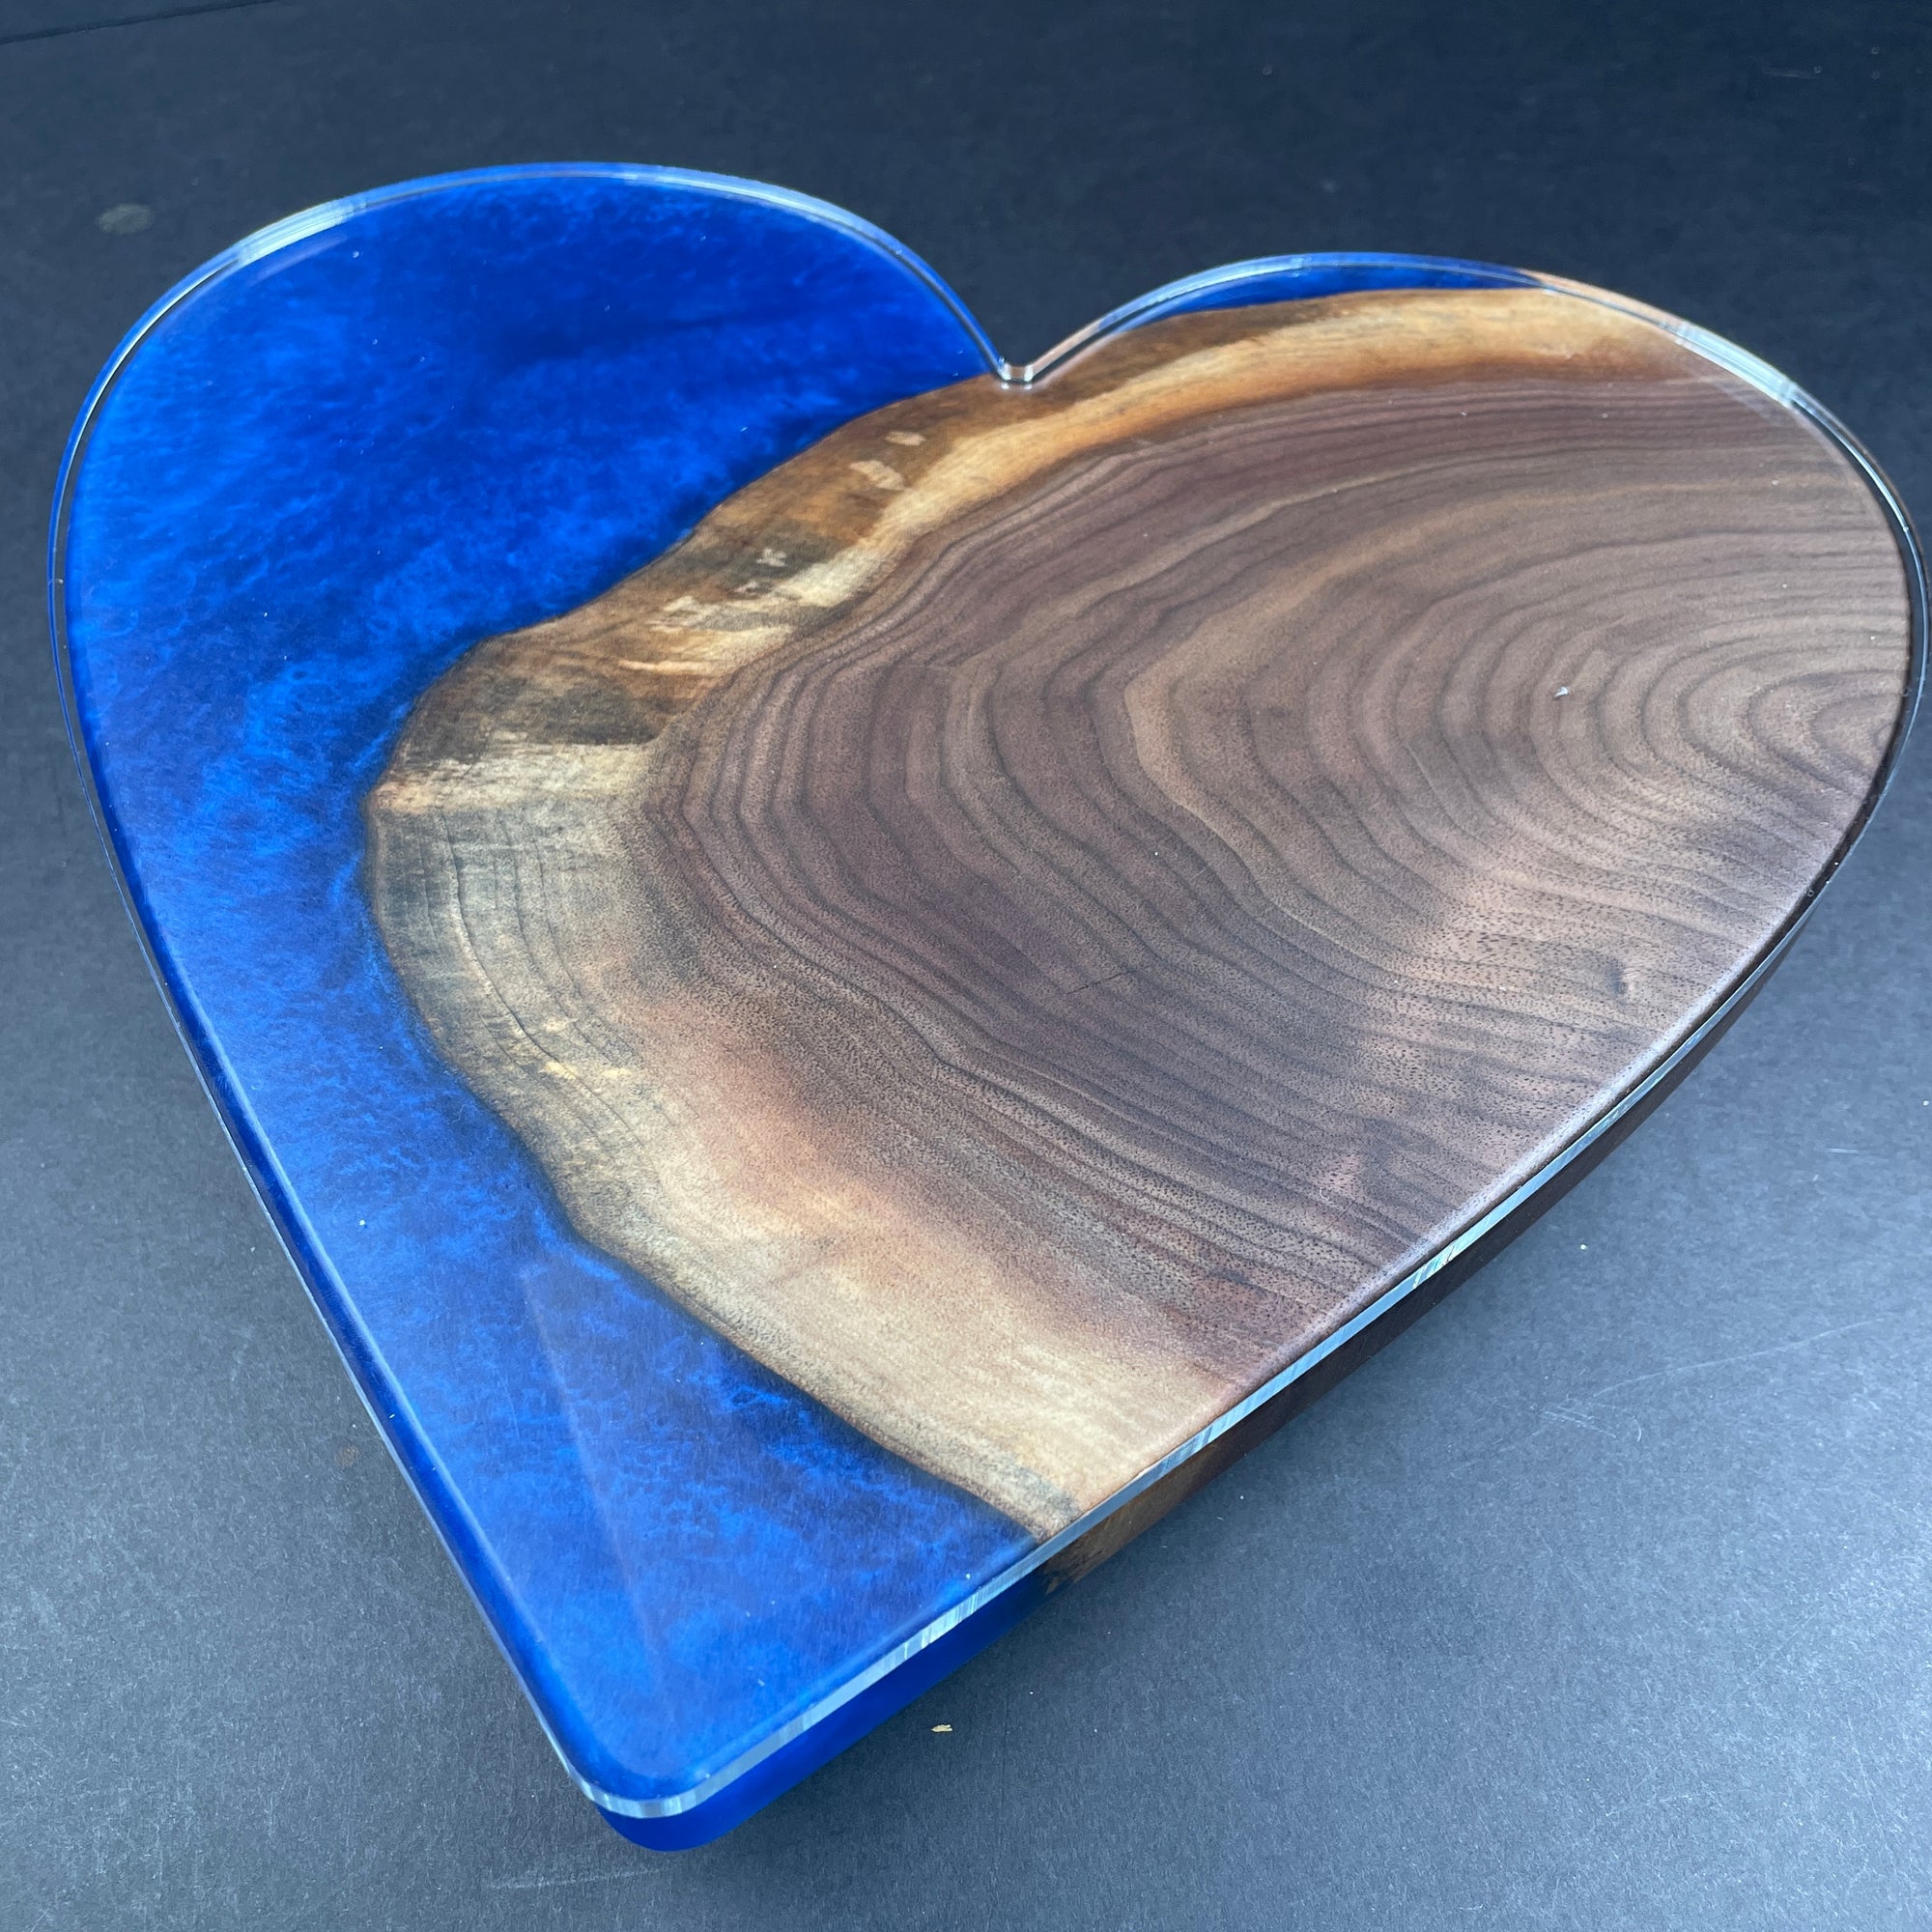 Heart Serving Board Router Template